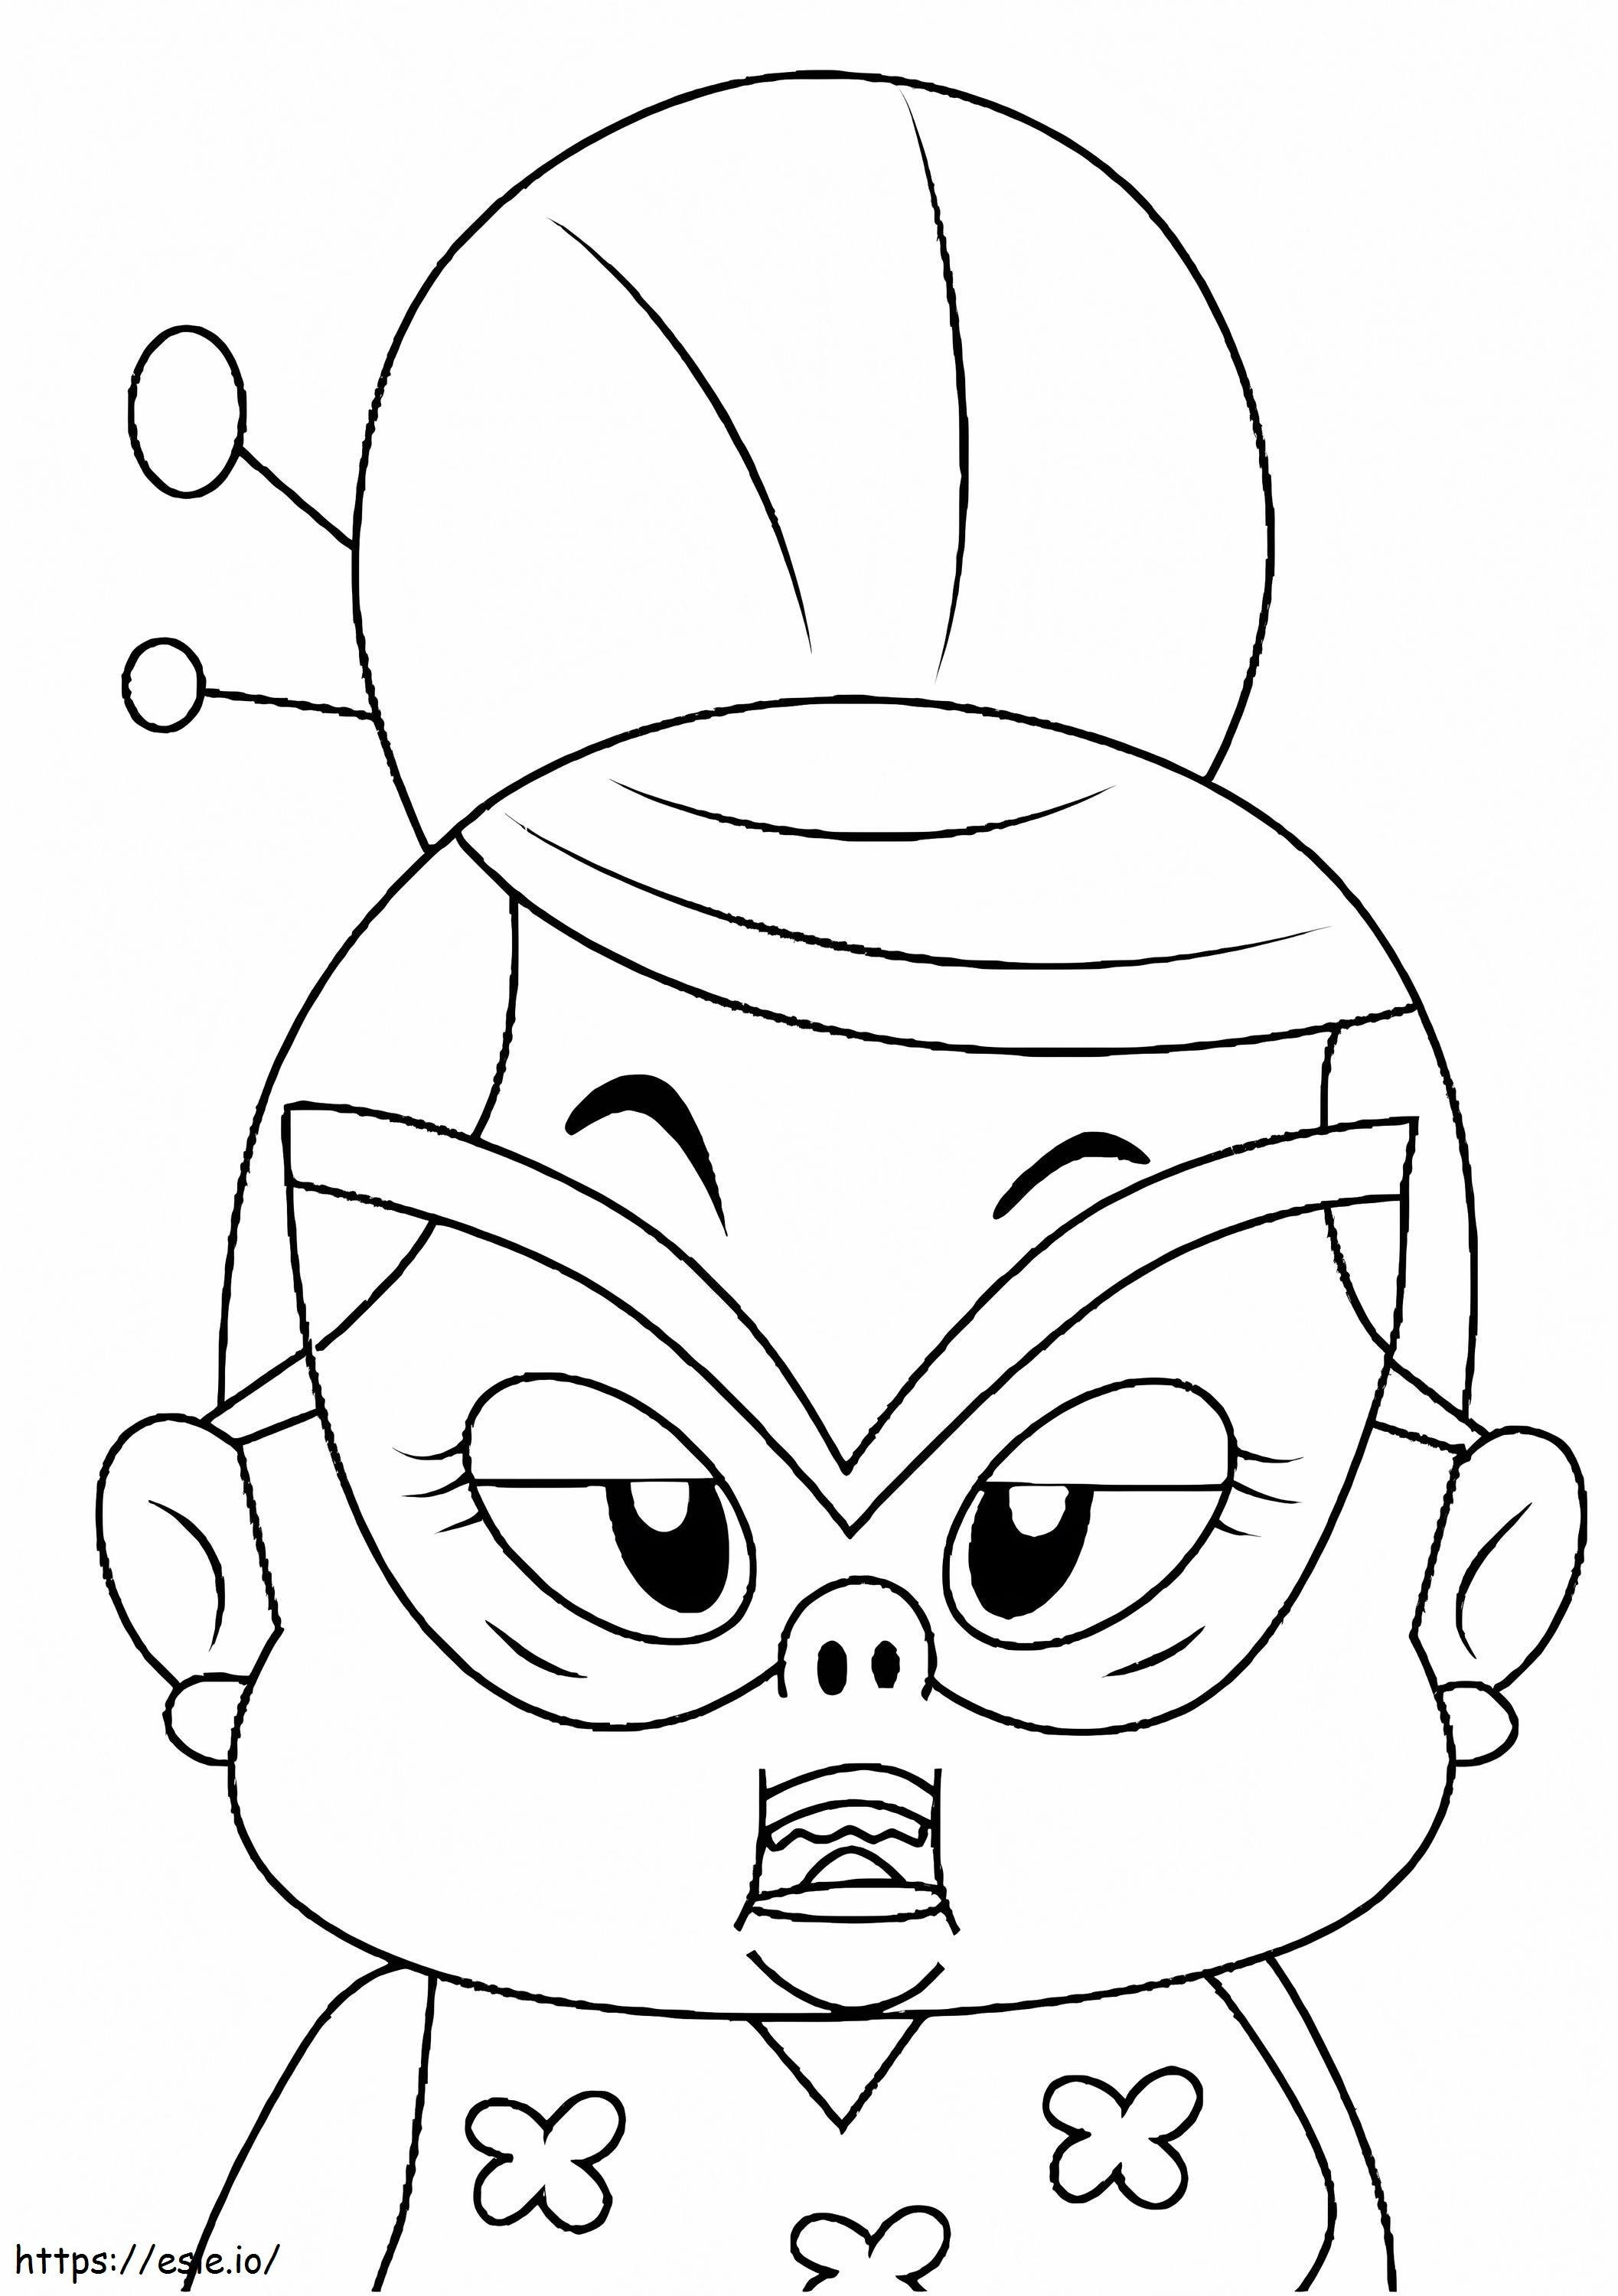 Ms. Cho From Chucks Choice coloring page